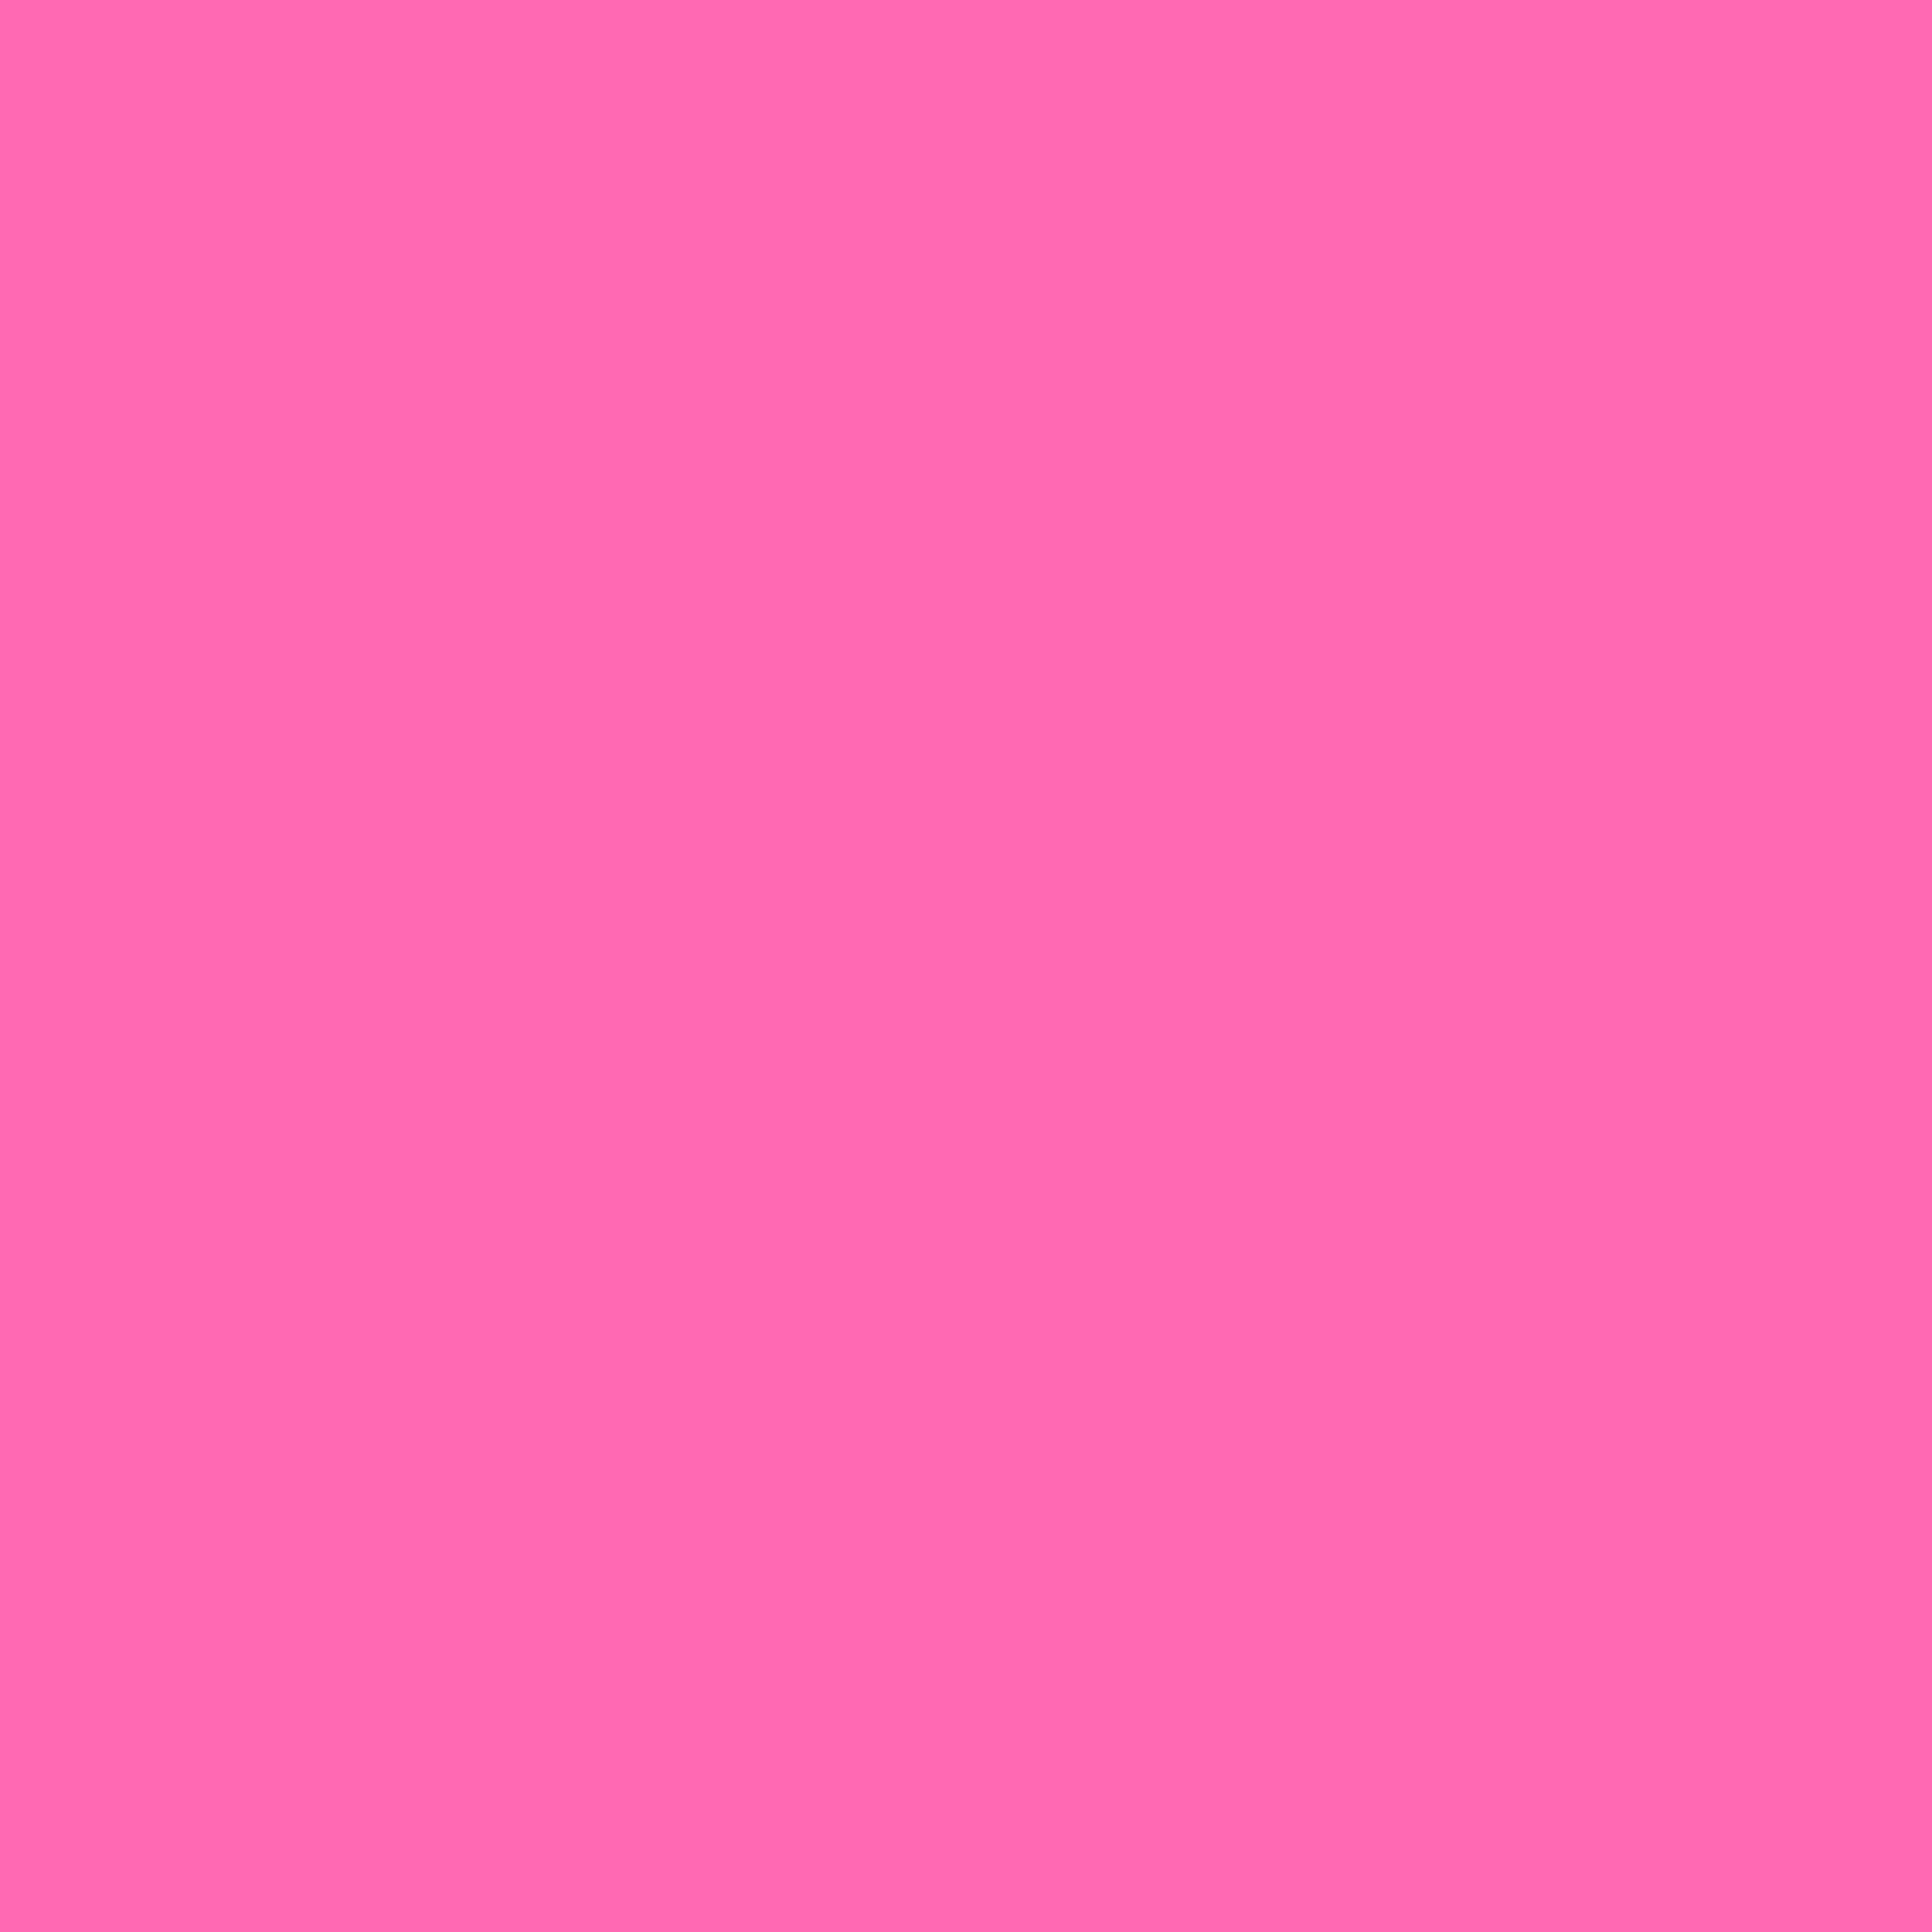 Pink Background Image Pictures 3060